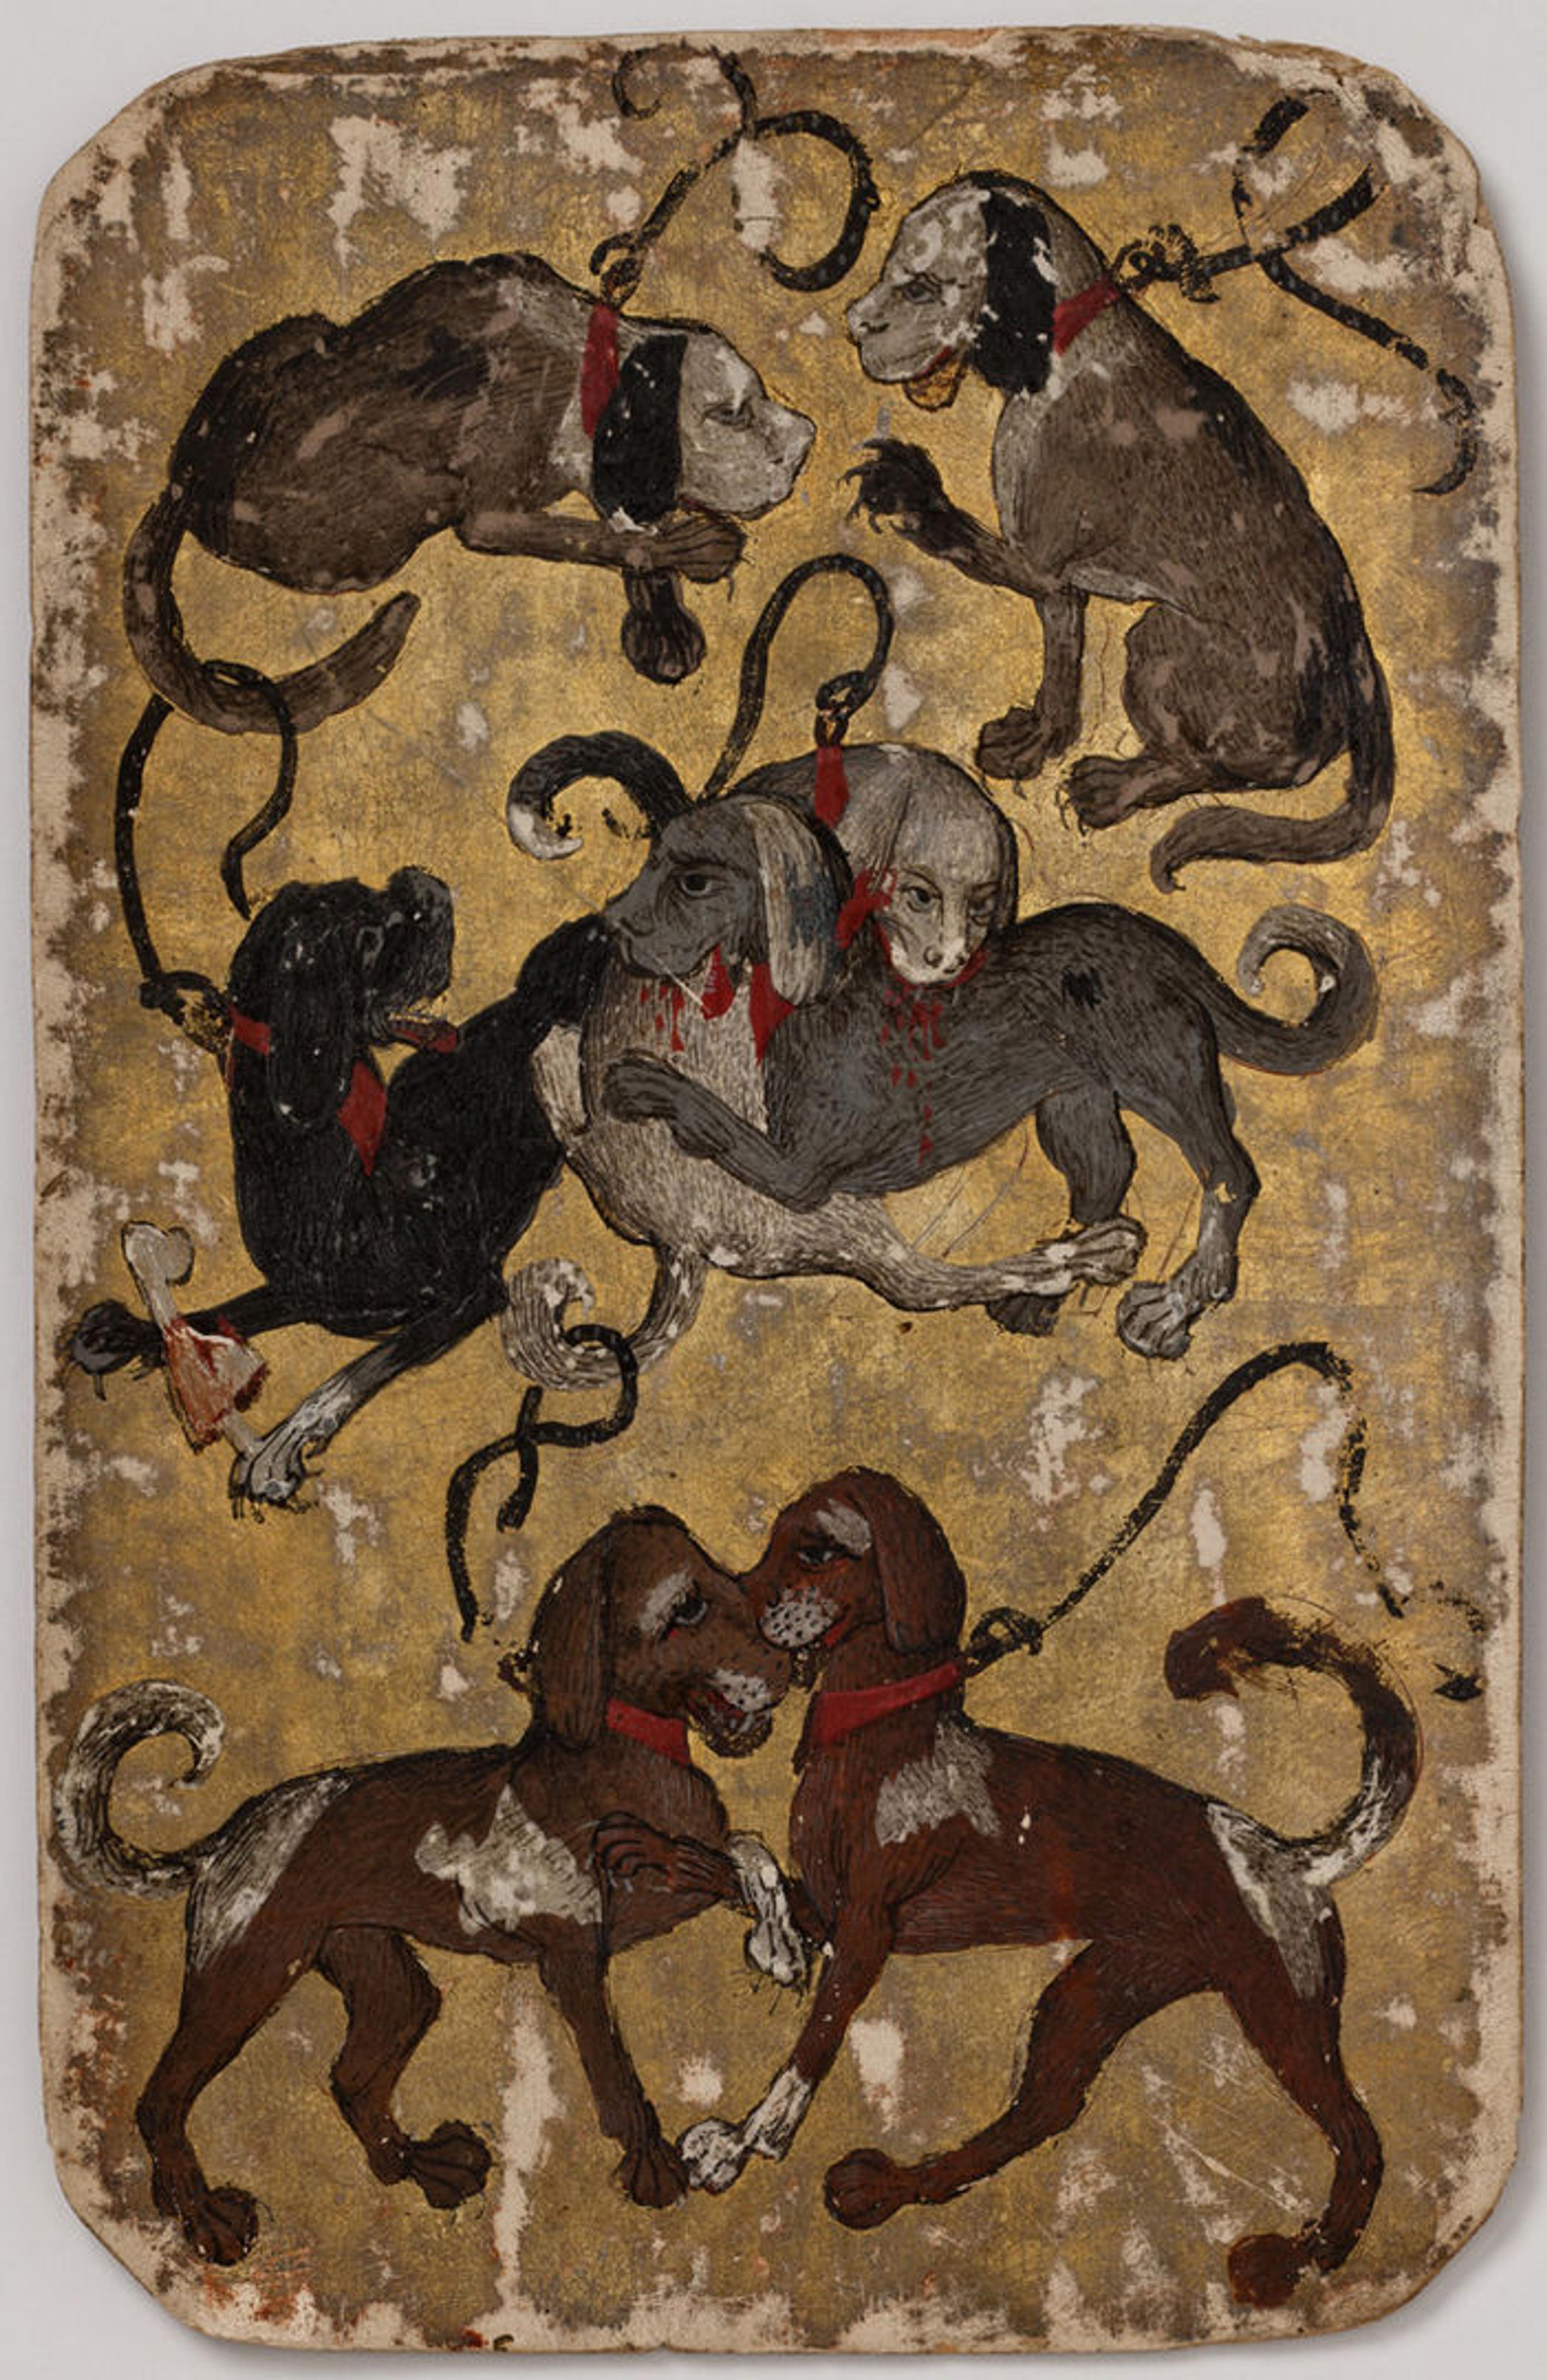 7 of Hounds, from The Stuttgart Playing Cards, ca. 1430. Made in Upper Rhineland, Germany. Paper (six layers in pasteboard) with gold ground and opaque paint over pen and ink; 7 1/2 x 4 3/4 in. (19.1 x 12.1 cm). Landesmuseum Württemberg, Stuttgart